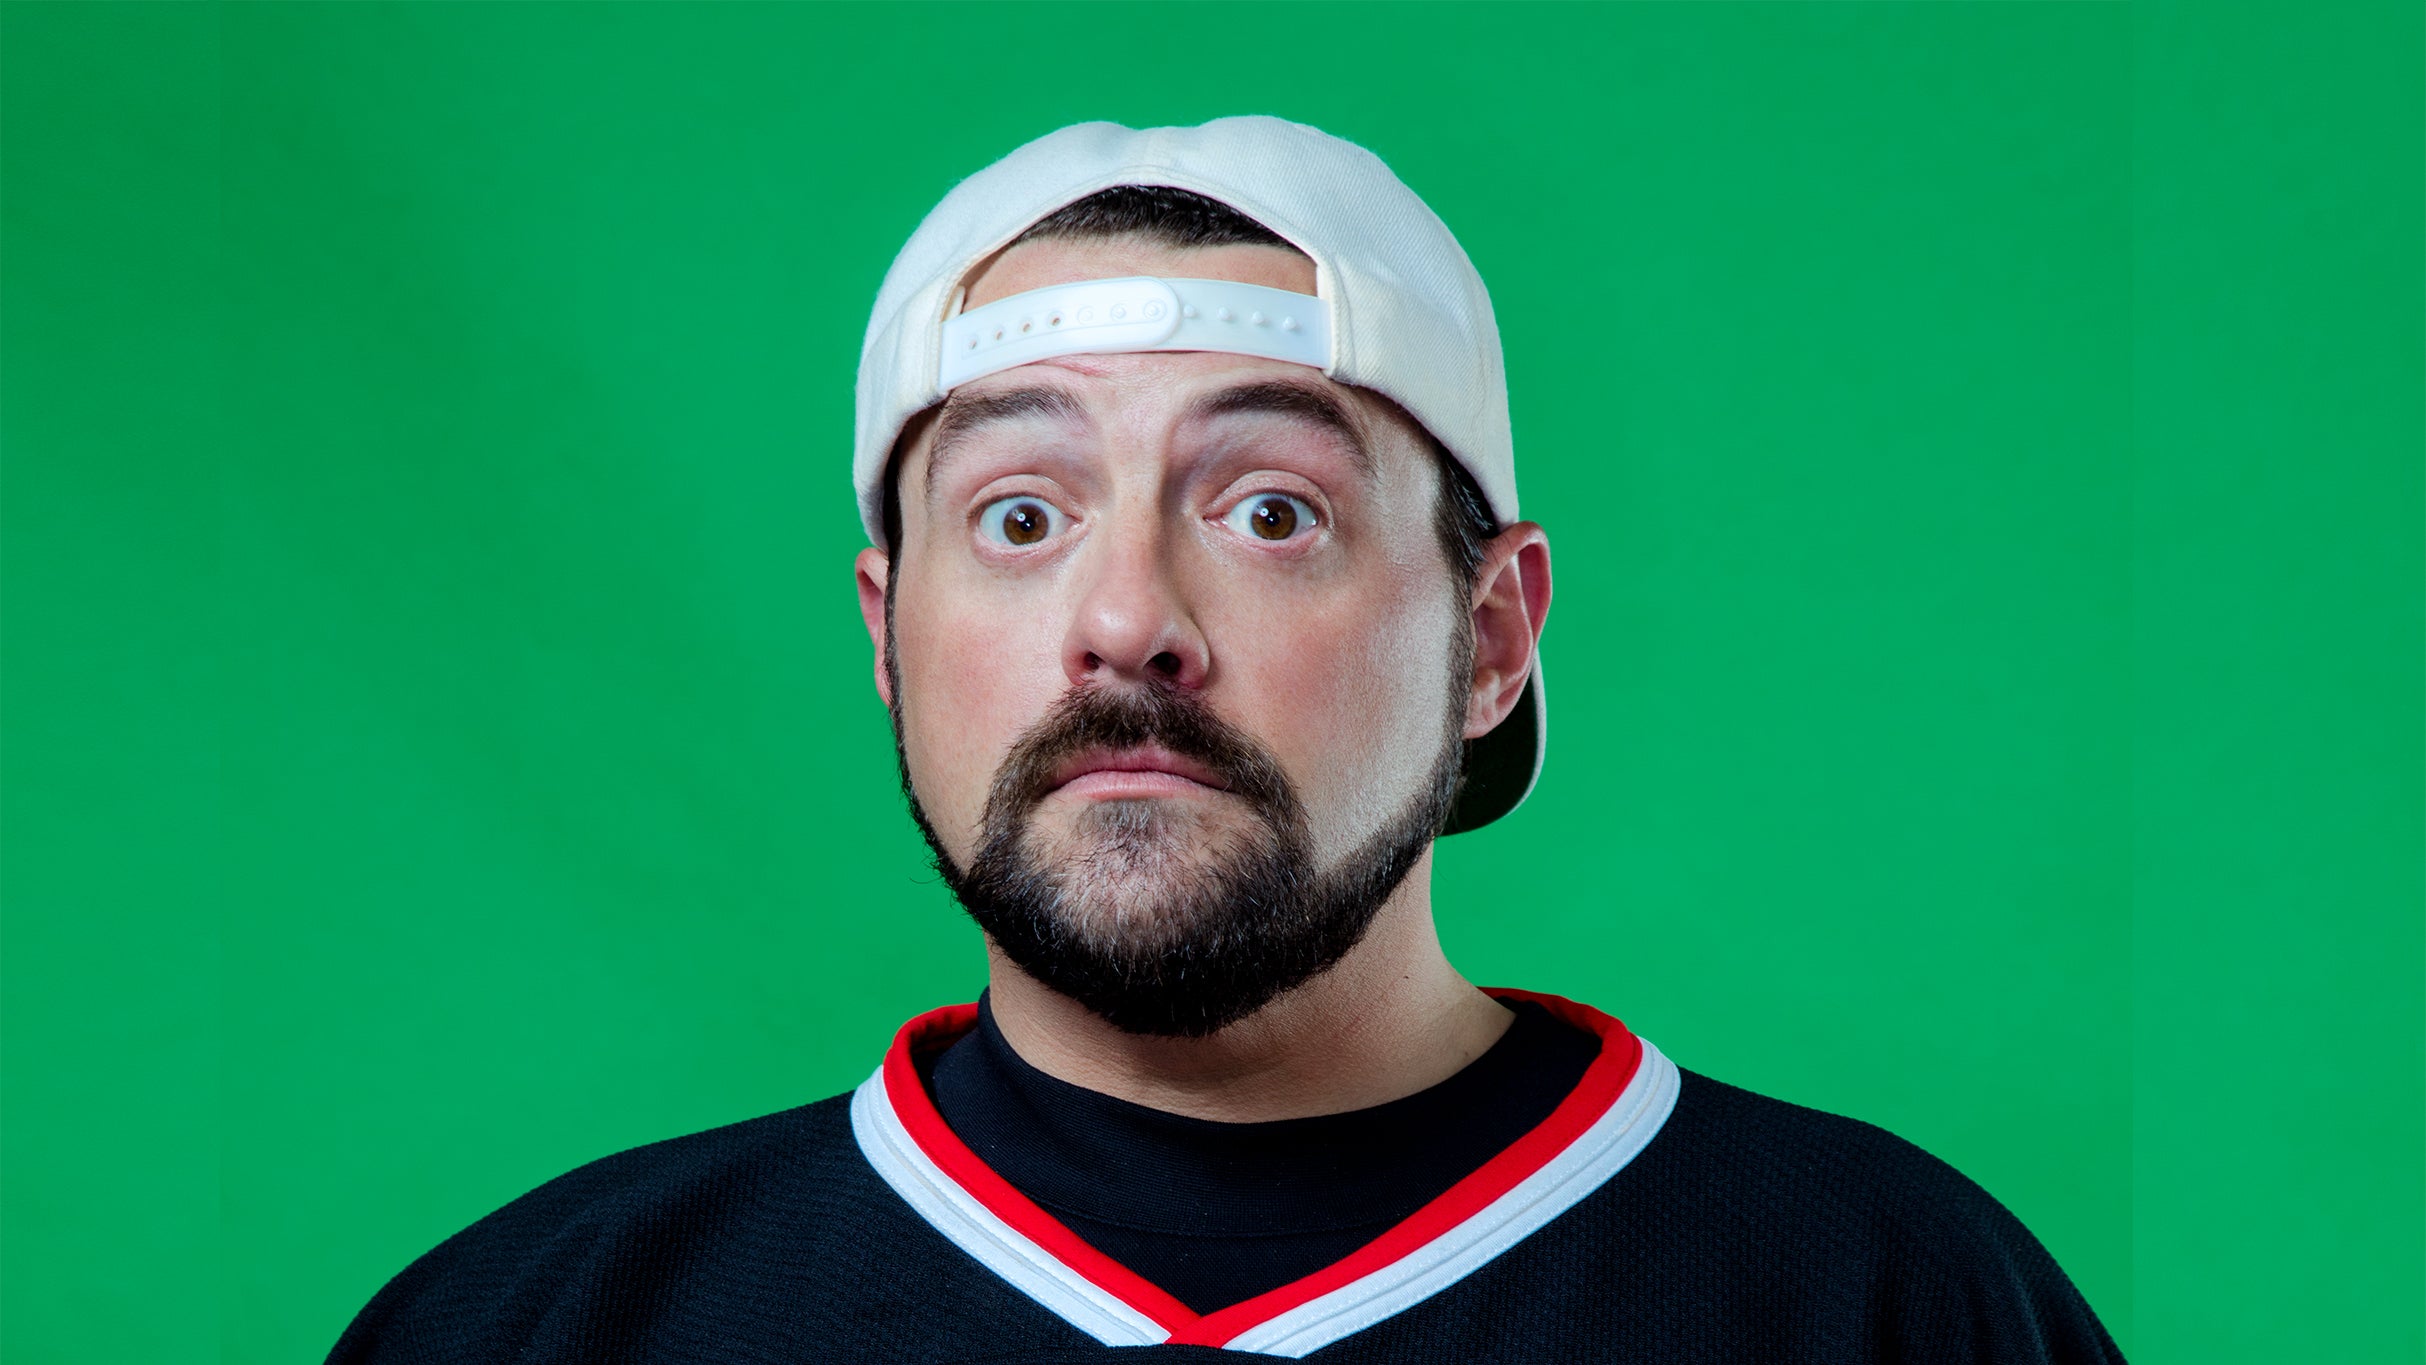 N2S: Kevin Smith: Jersey Sure presale code for event tickets in Newark, NJ (New Jersey Performing Arts Center)